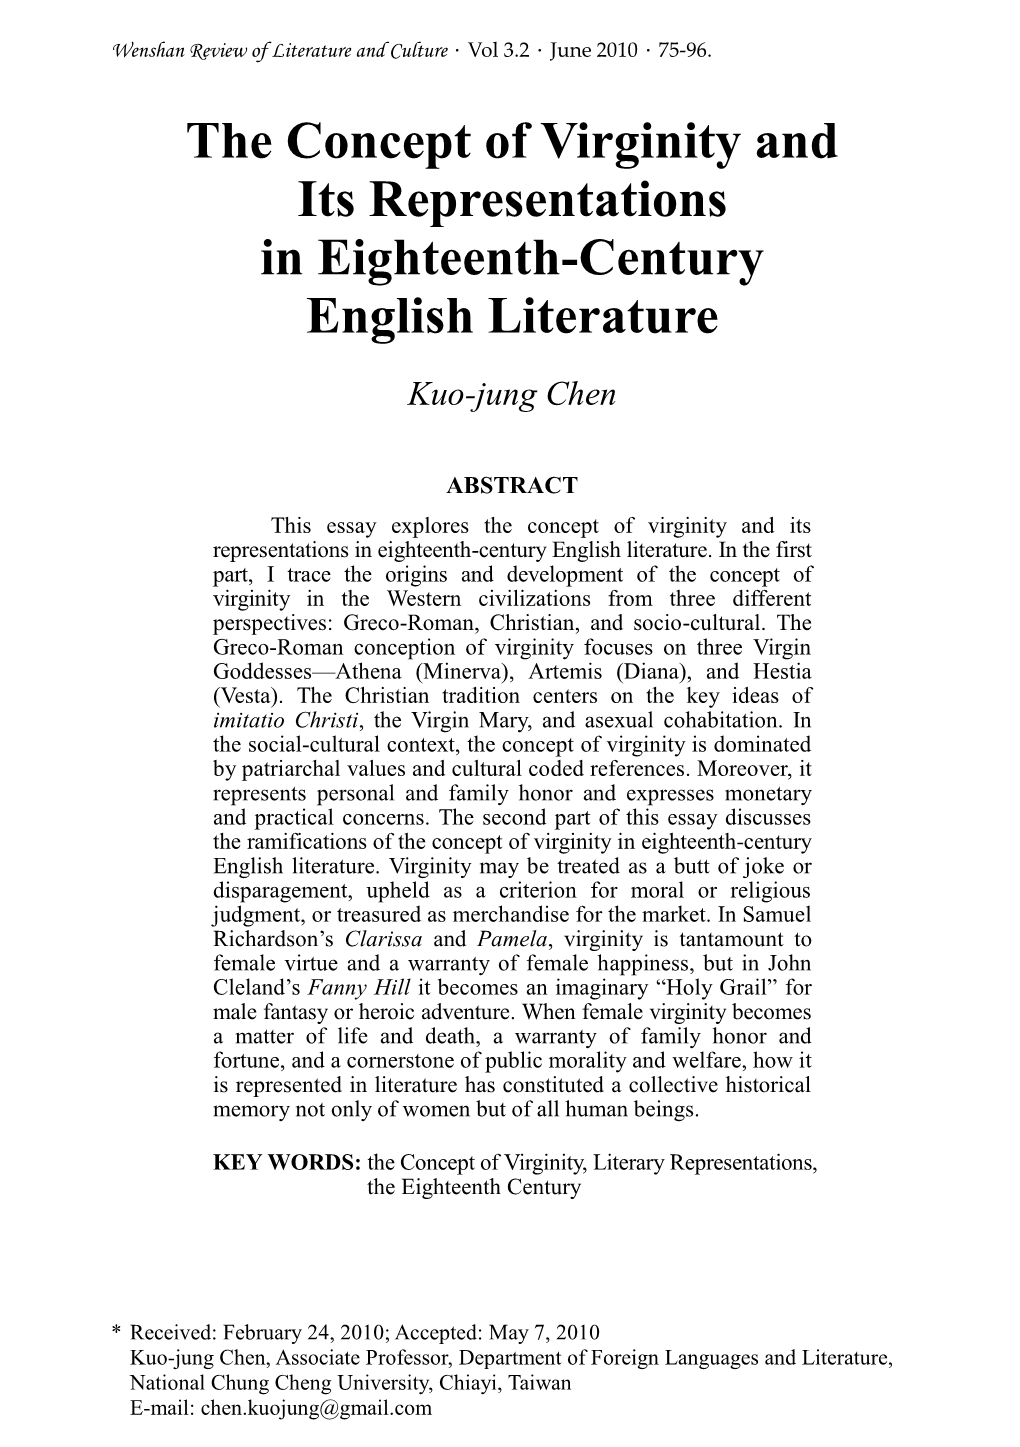 The Concept of Virginity and Its Representations in Eighteenth-Century English Literature